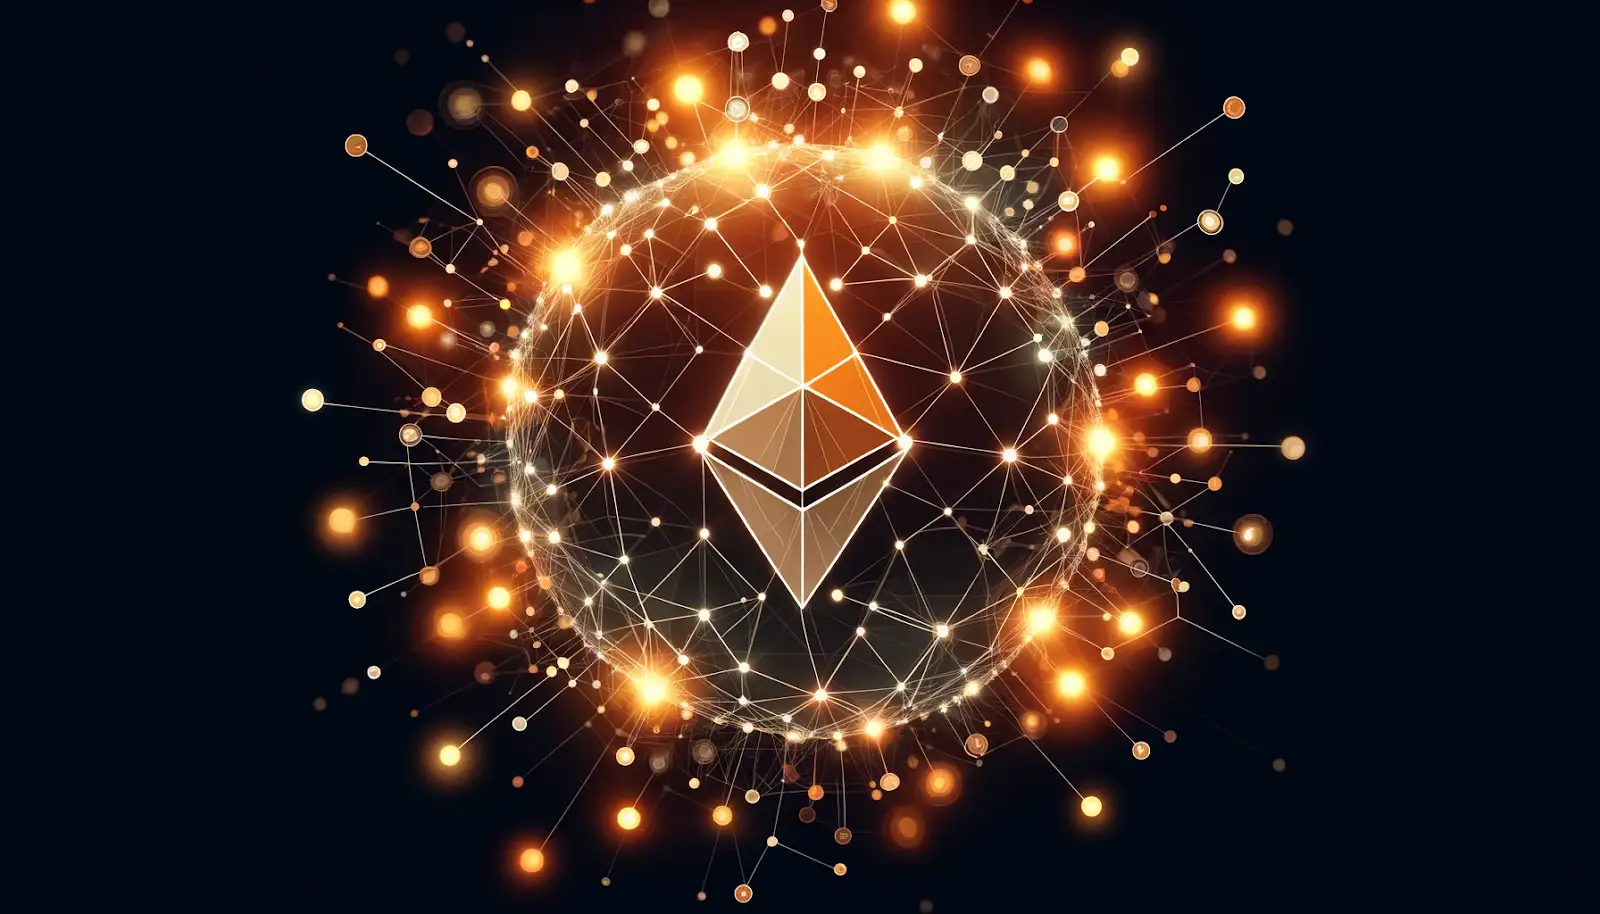 Ethereum symbol covered by a sphere of connected nodes